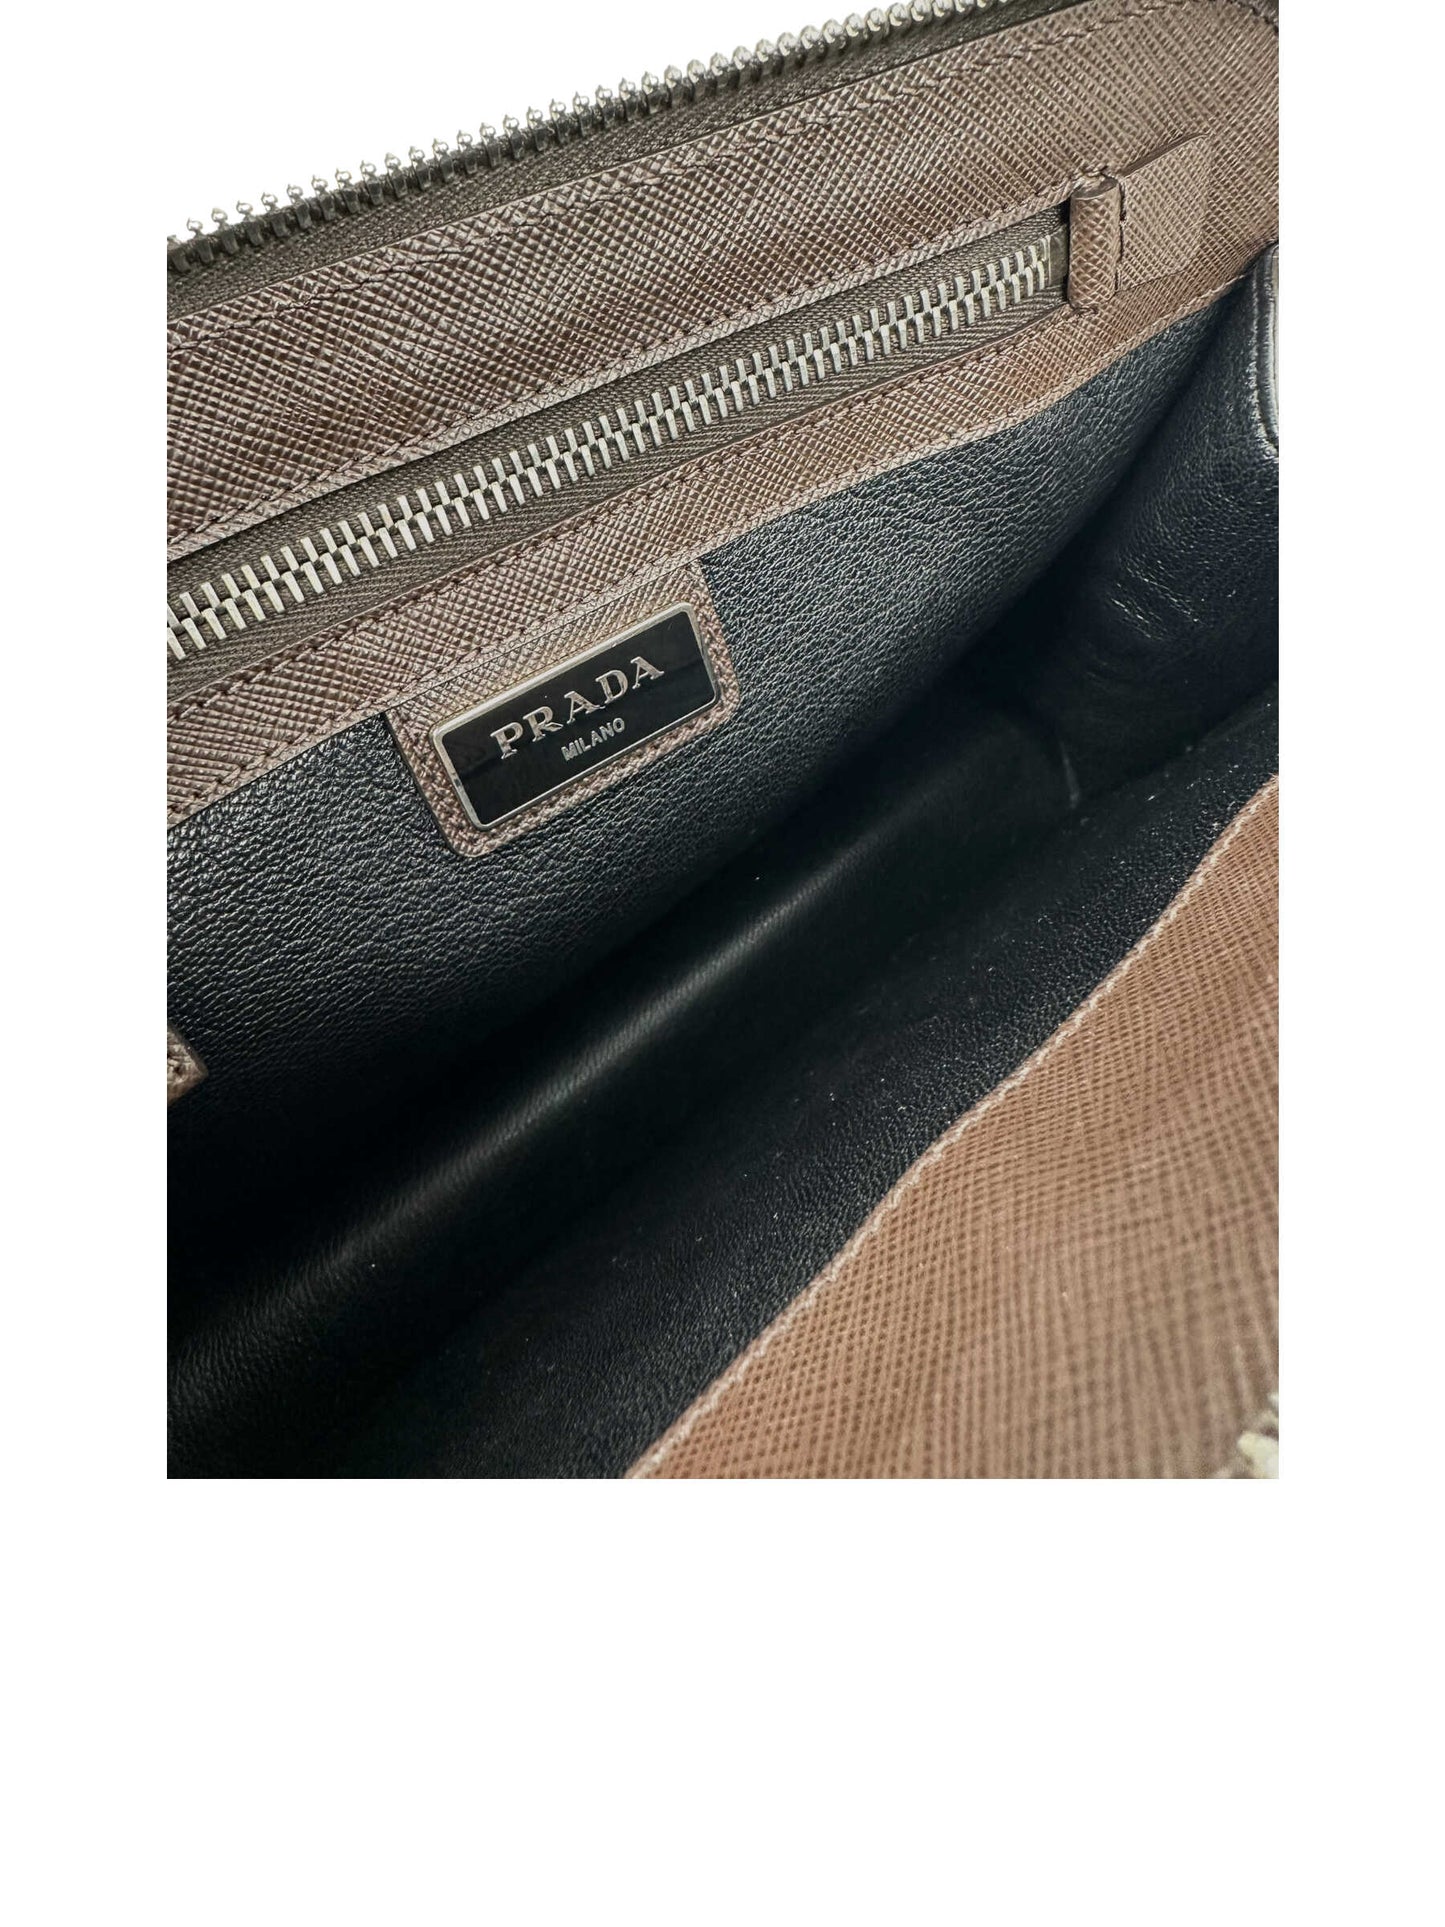 Prada Dark Brown Leather Clutch with Wrist Strap — Genuine Design Luxury Consignment for Men. New & Pre-Owned Clothing, Shoes, & Accessories. Calgary, Canada